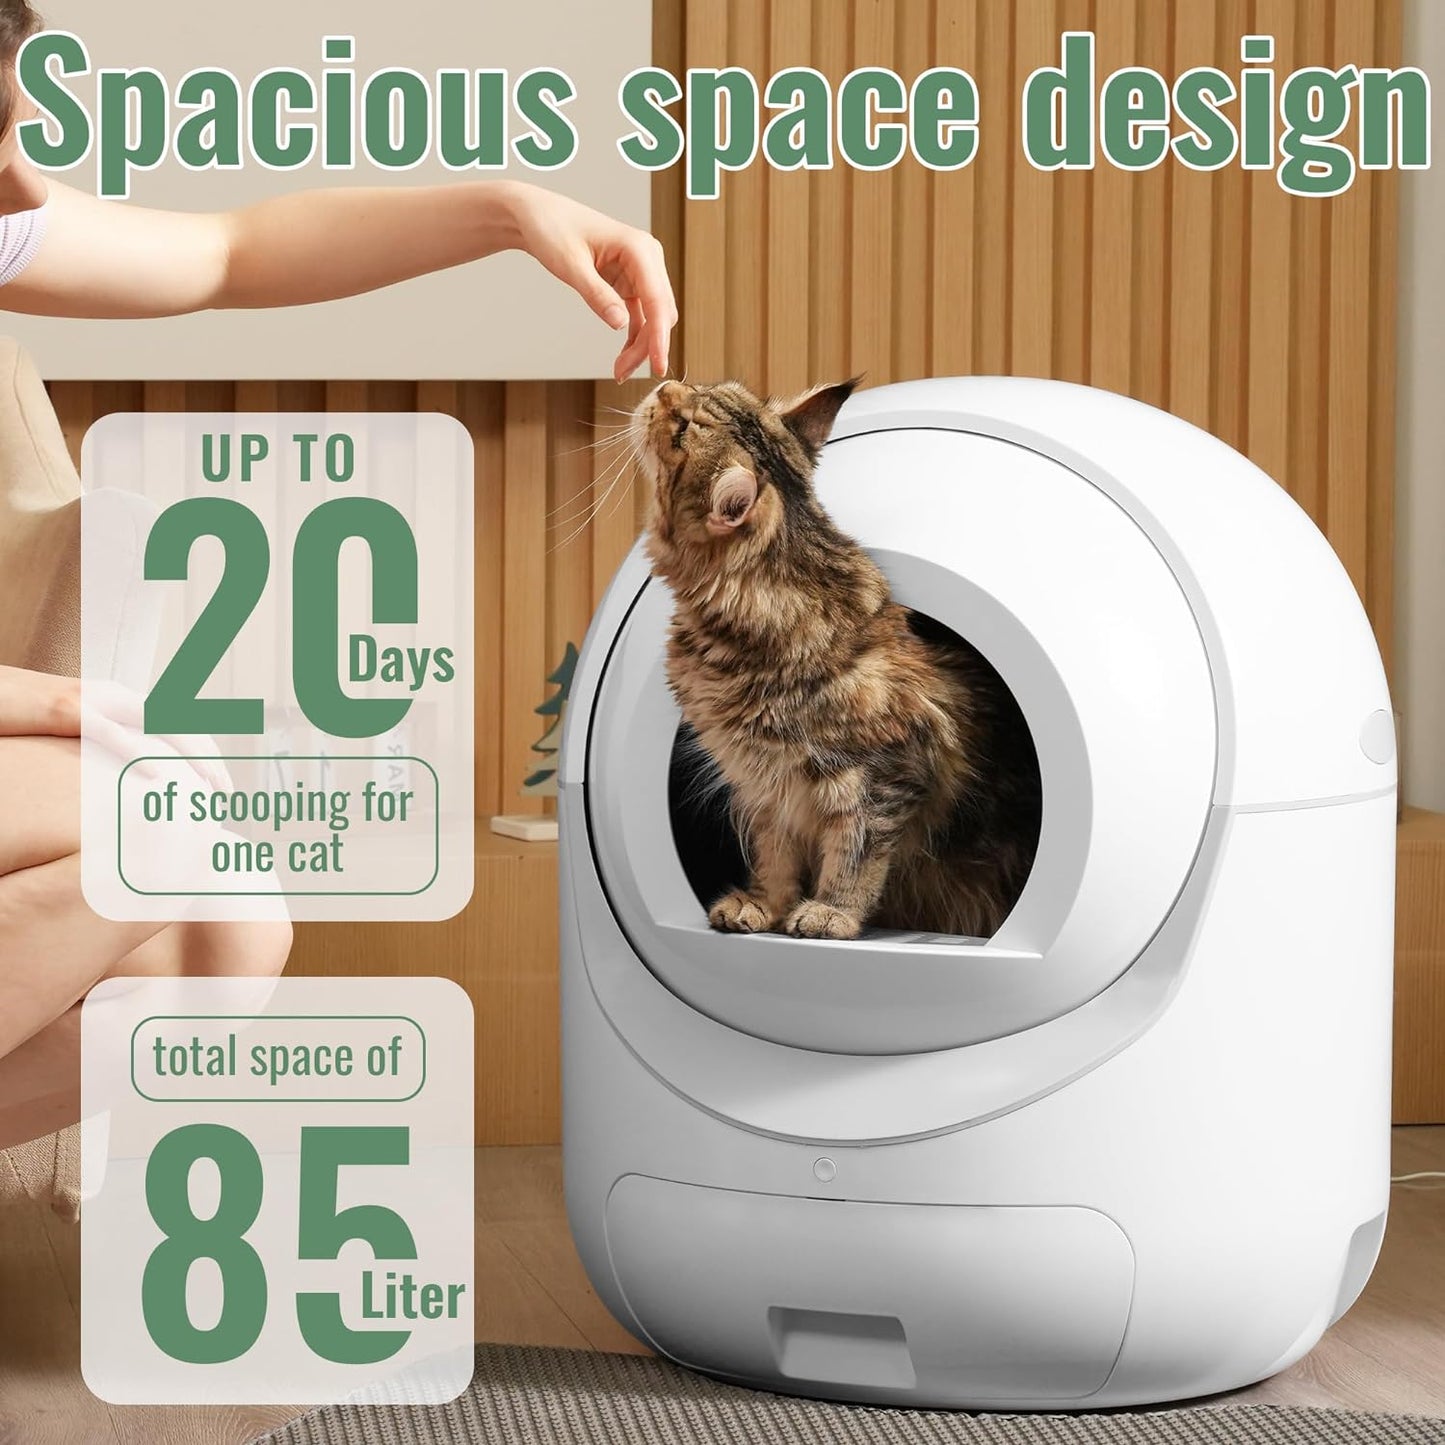 Self Cleaning Cat Litter Box - 85L Extra Large Automatic Cat Litter Box Self Cleaning for Multiple Cats, Anti-Pinch/Odor-Removal Design, All Litter Can Use, with Garbage Bags/Mats0223